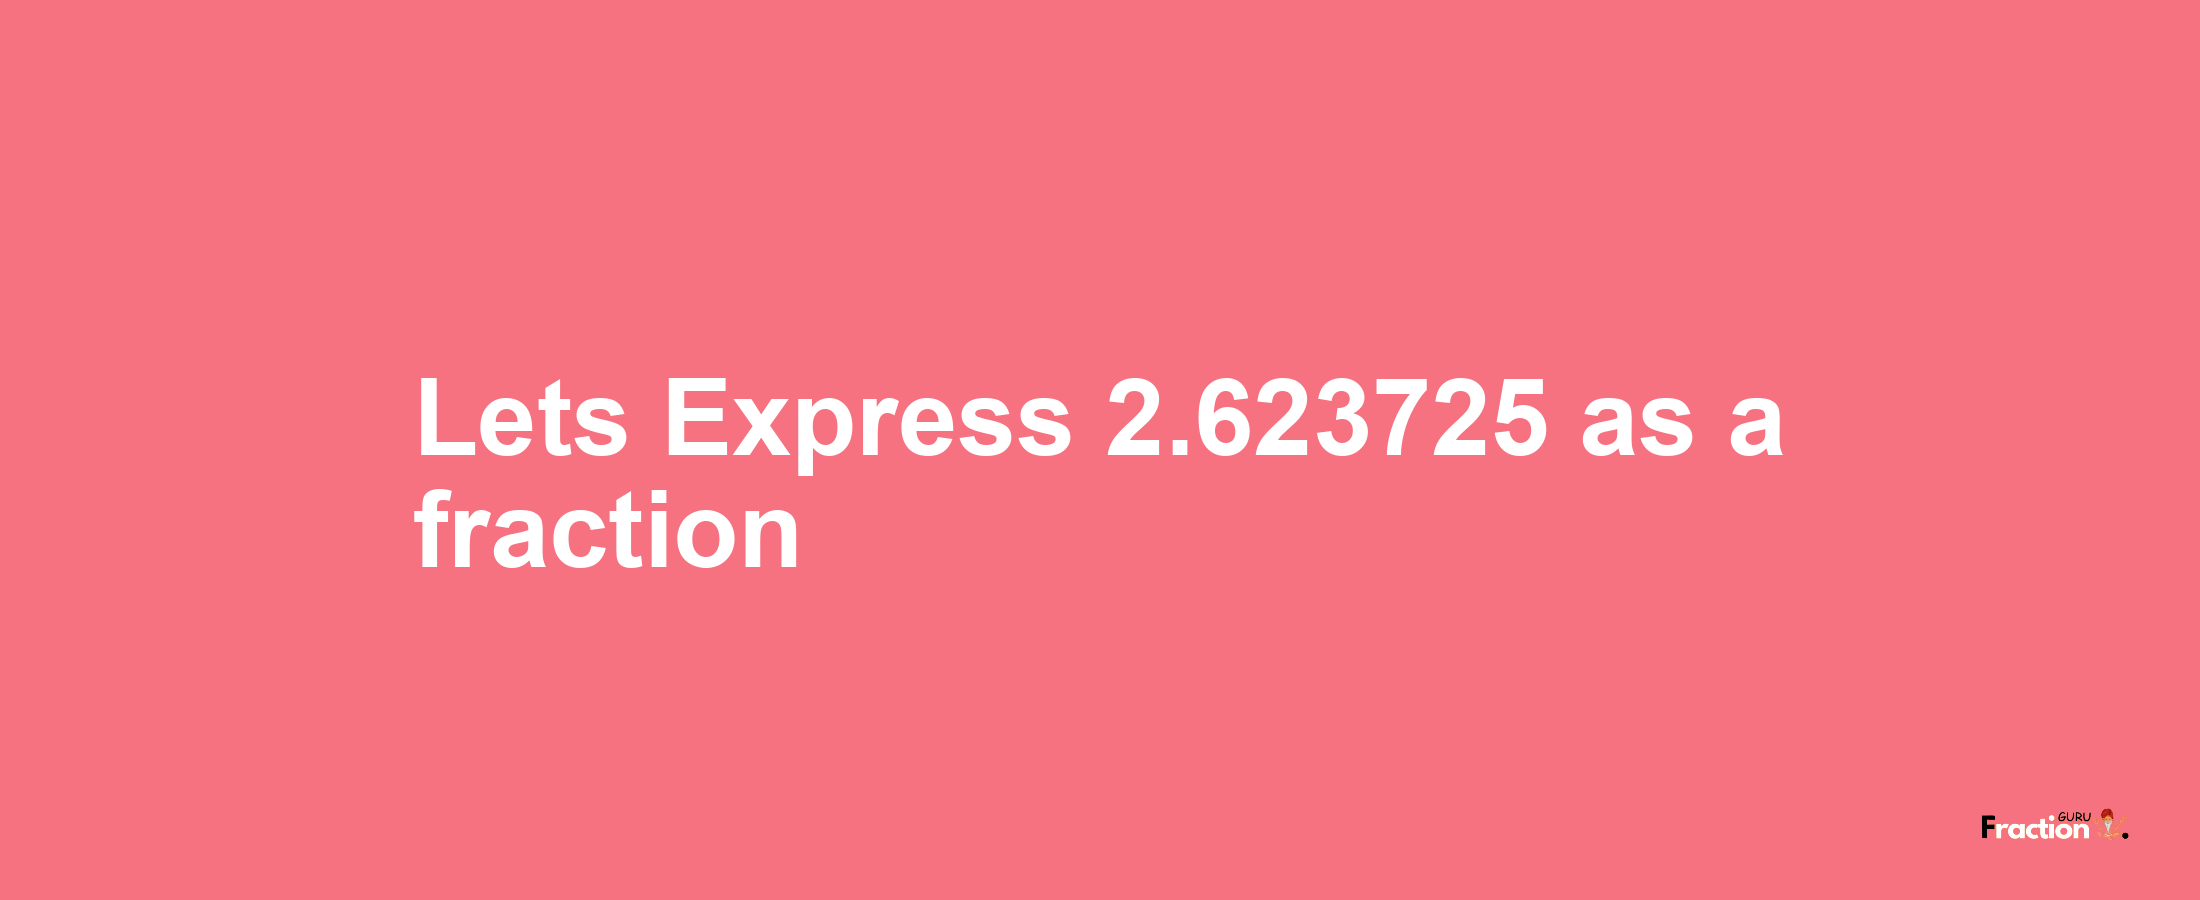 Lets Express 2.623725 as afraction